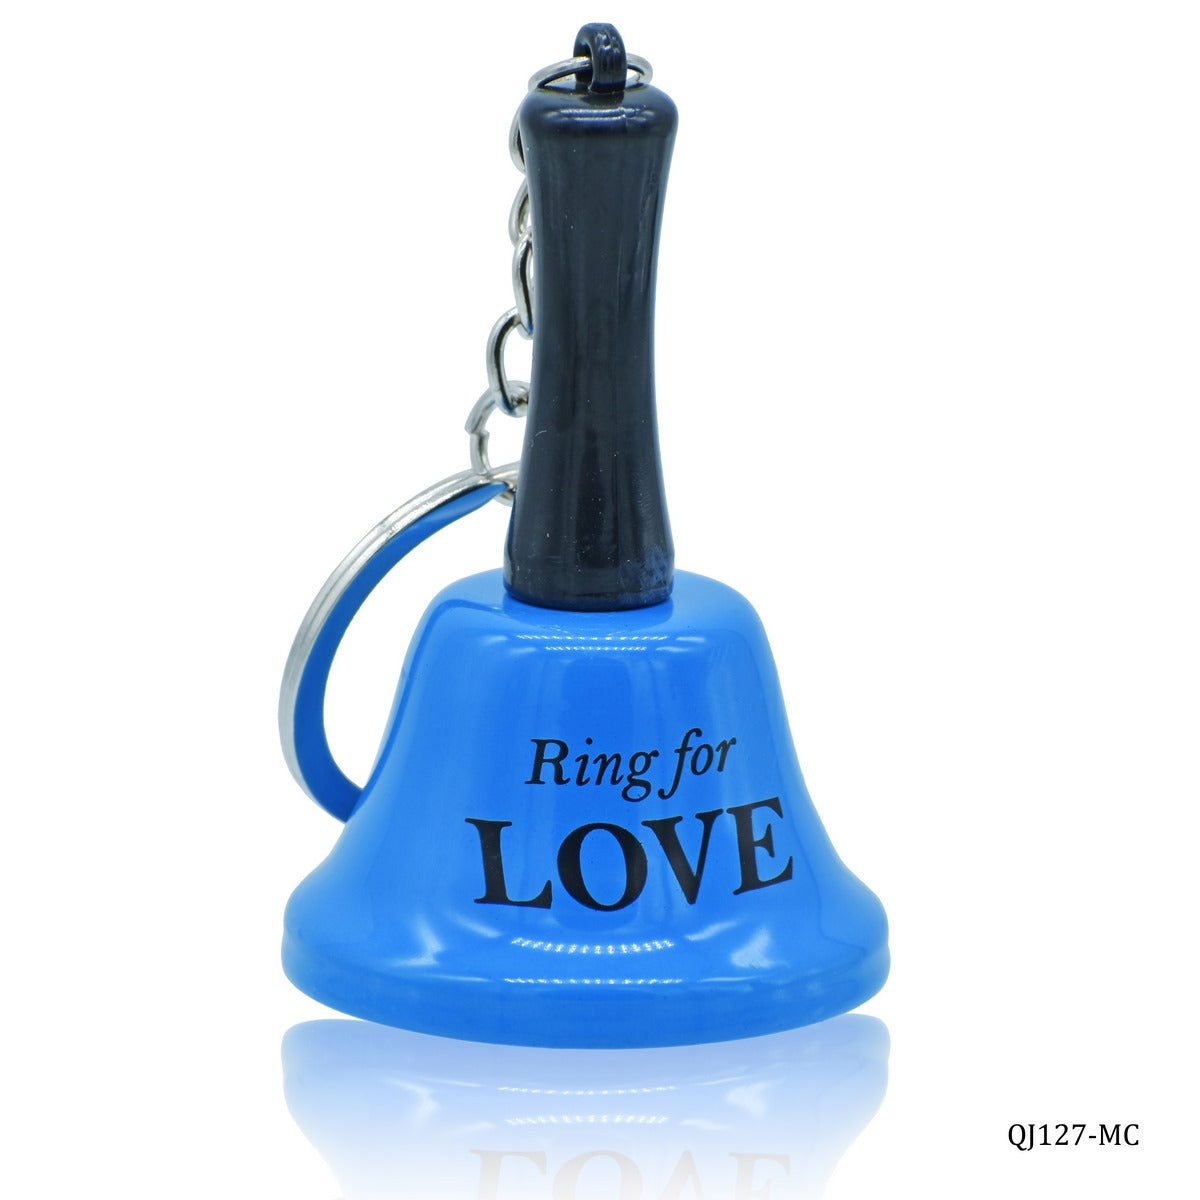 jags-mumbai Office Desk Stationery Office Call Bell Small Mix Color Ring For Love